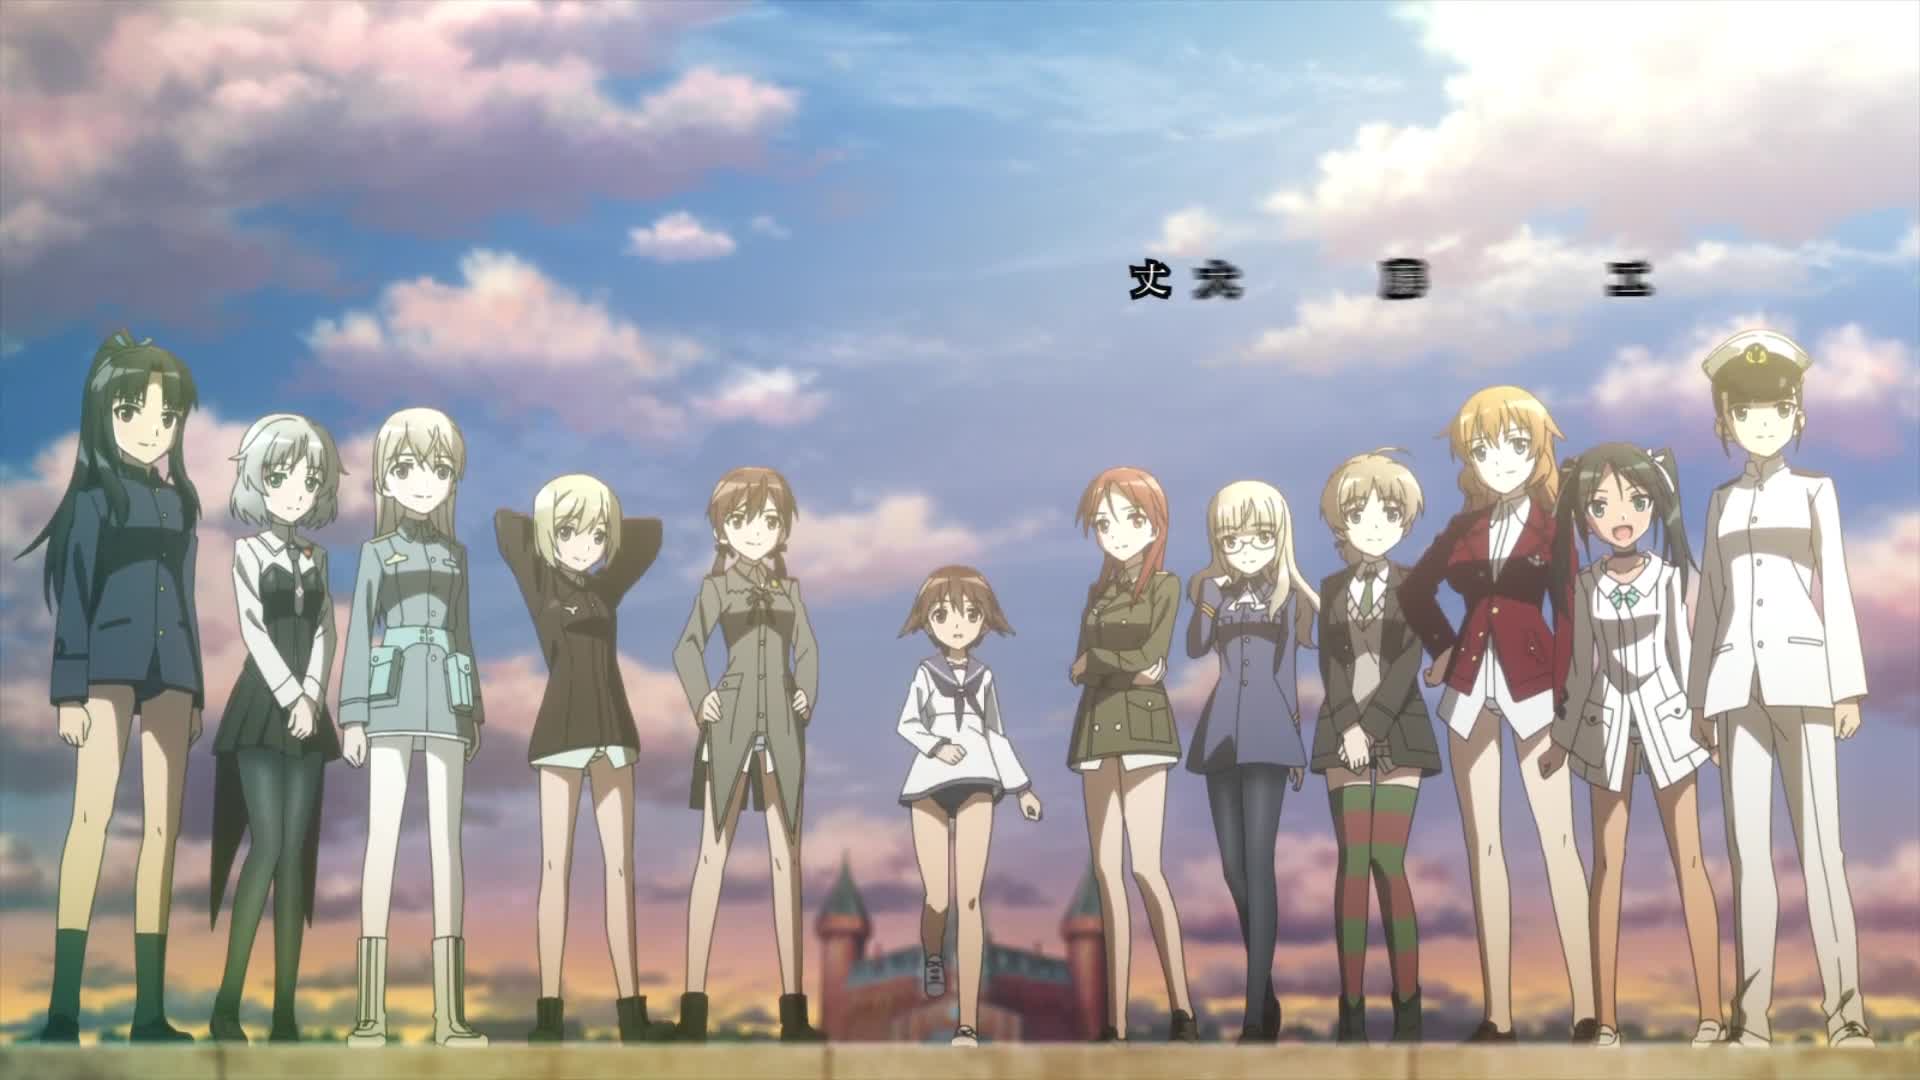 Strike Witches: Road to Berlin (Dub)